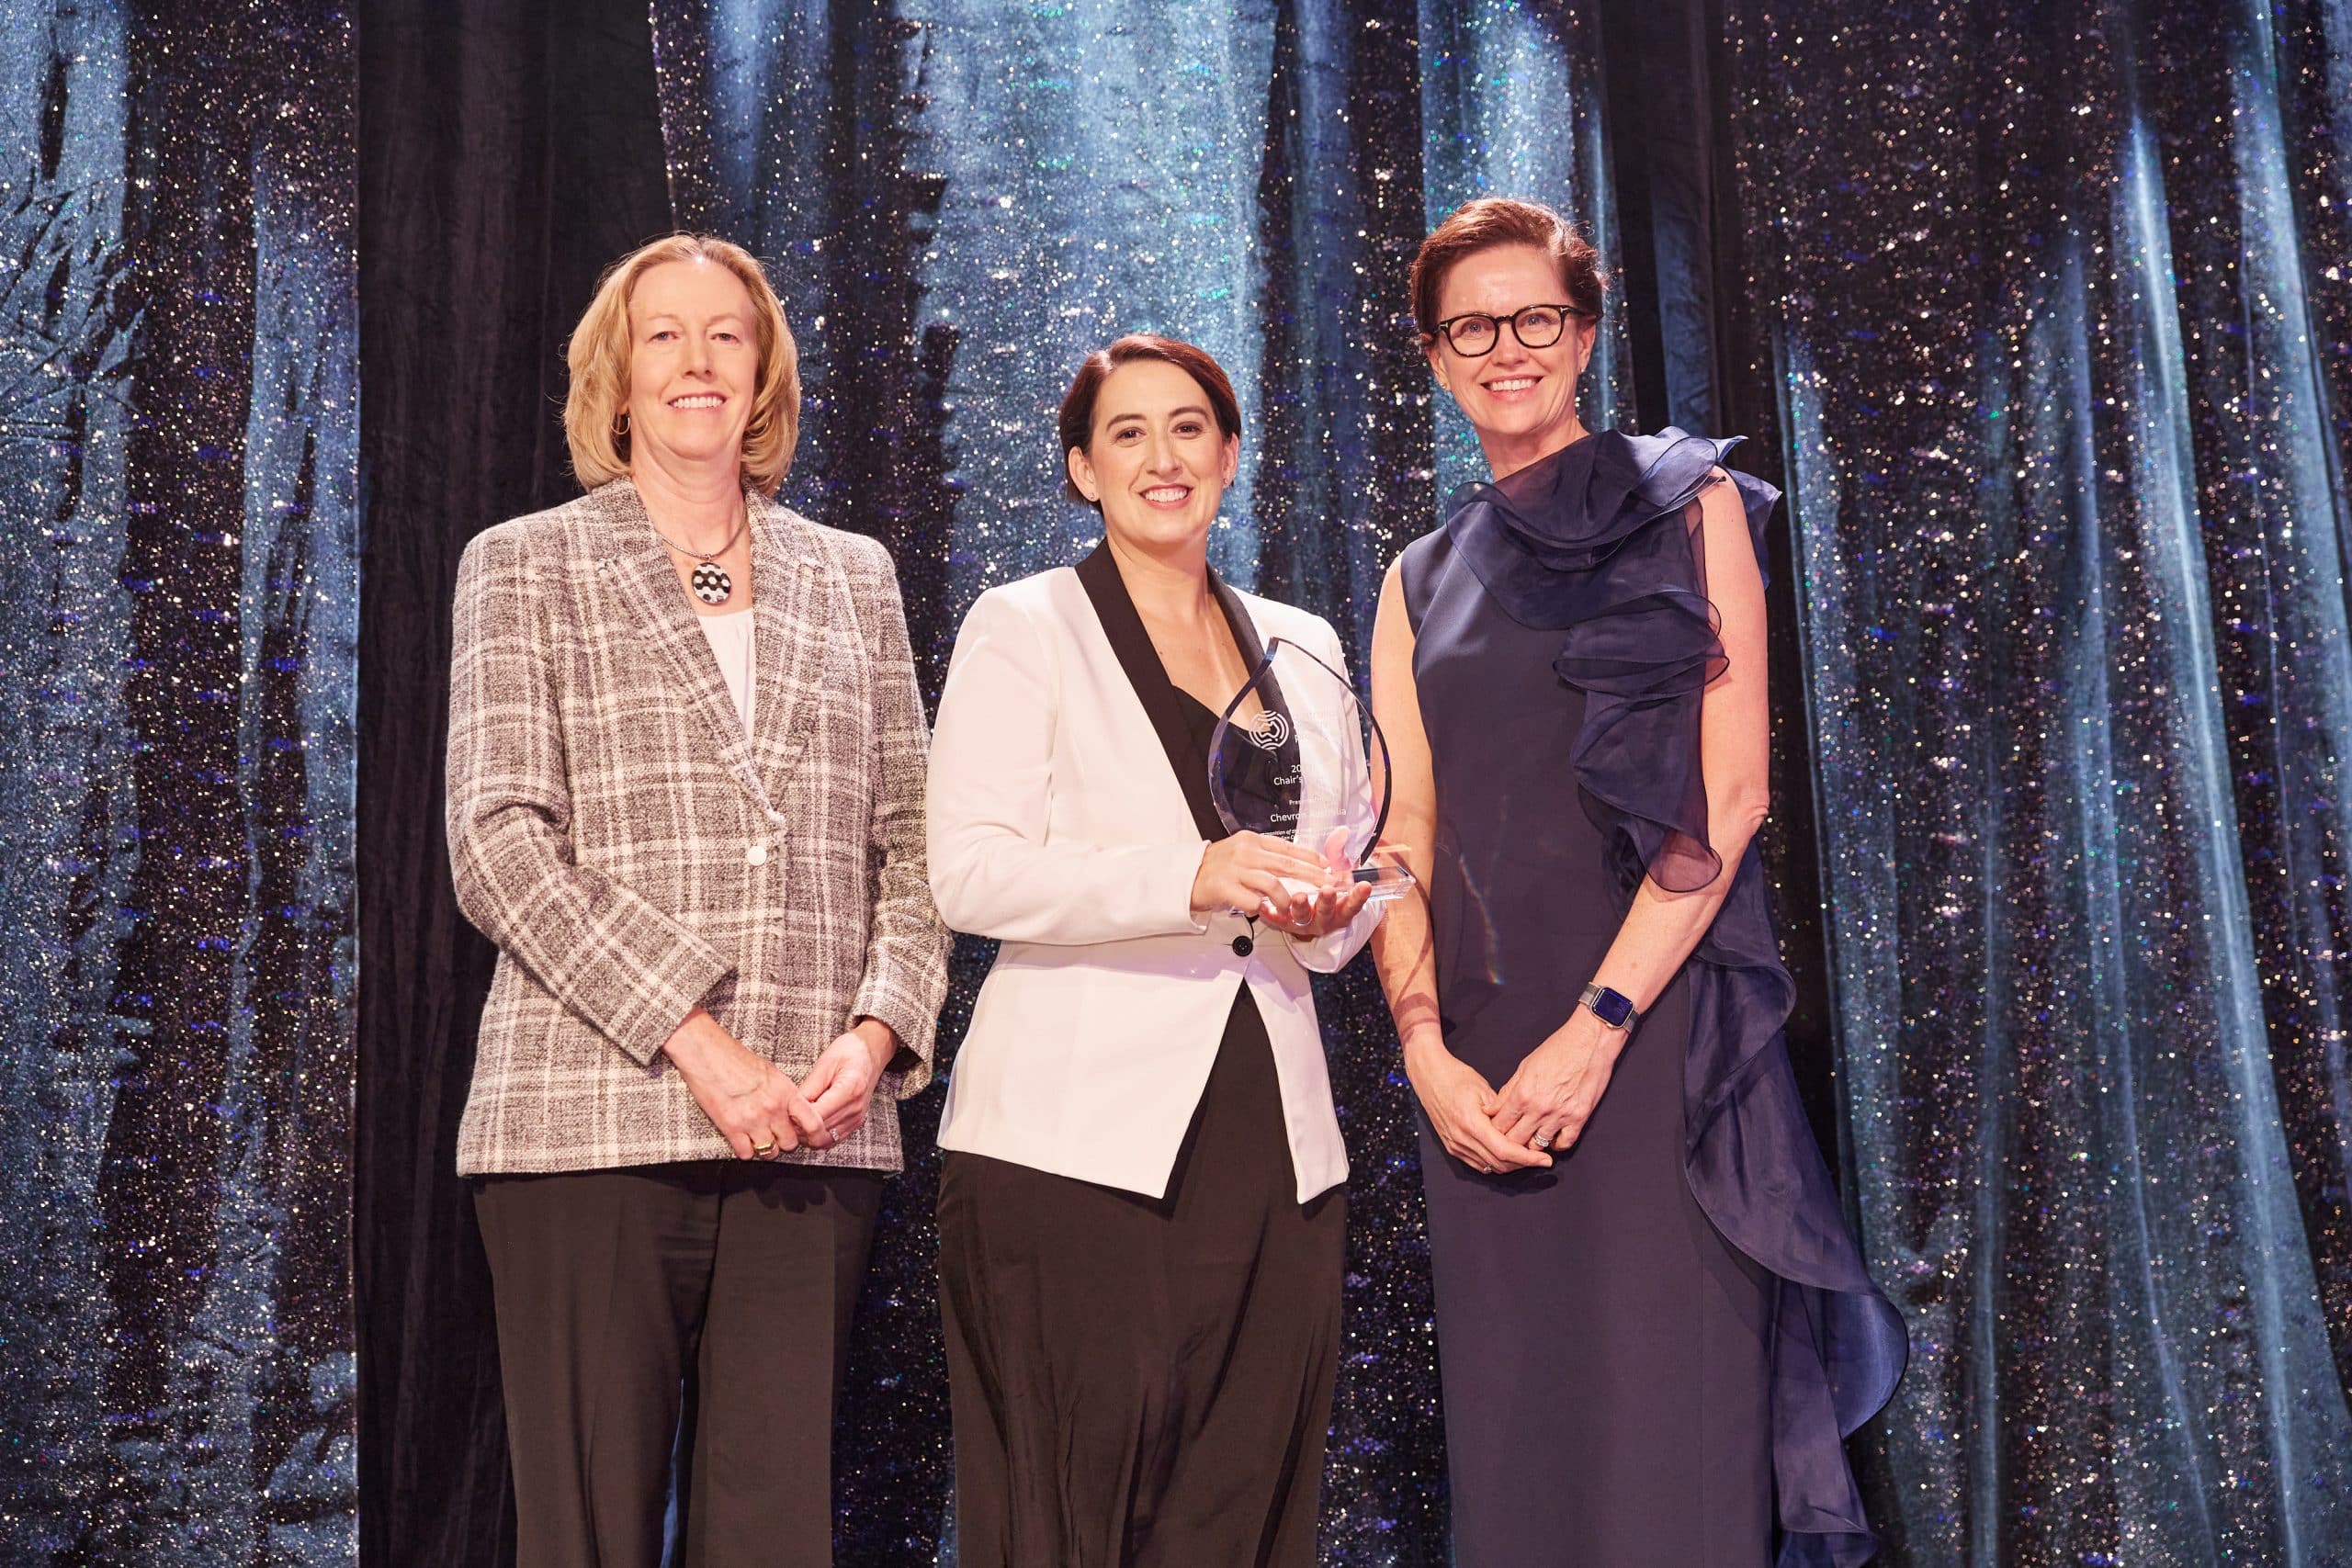 Media Release: Workplace anti-bullying program takes out top prize at Excellence Awards